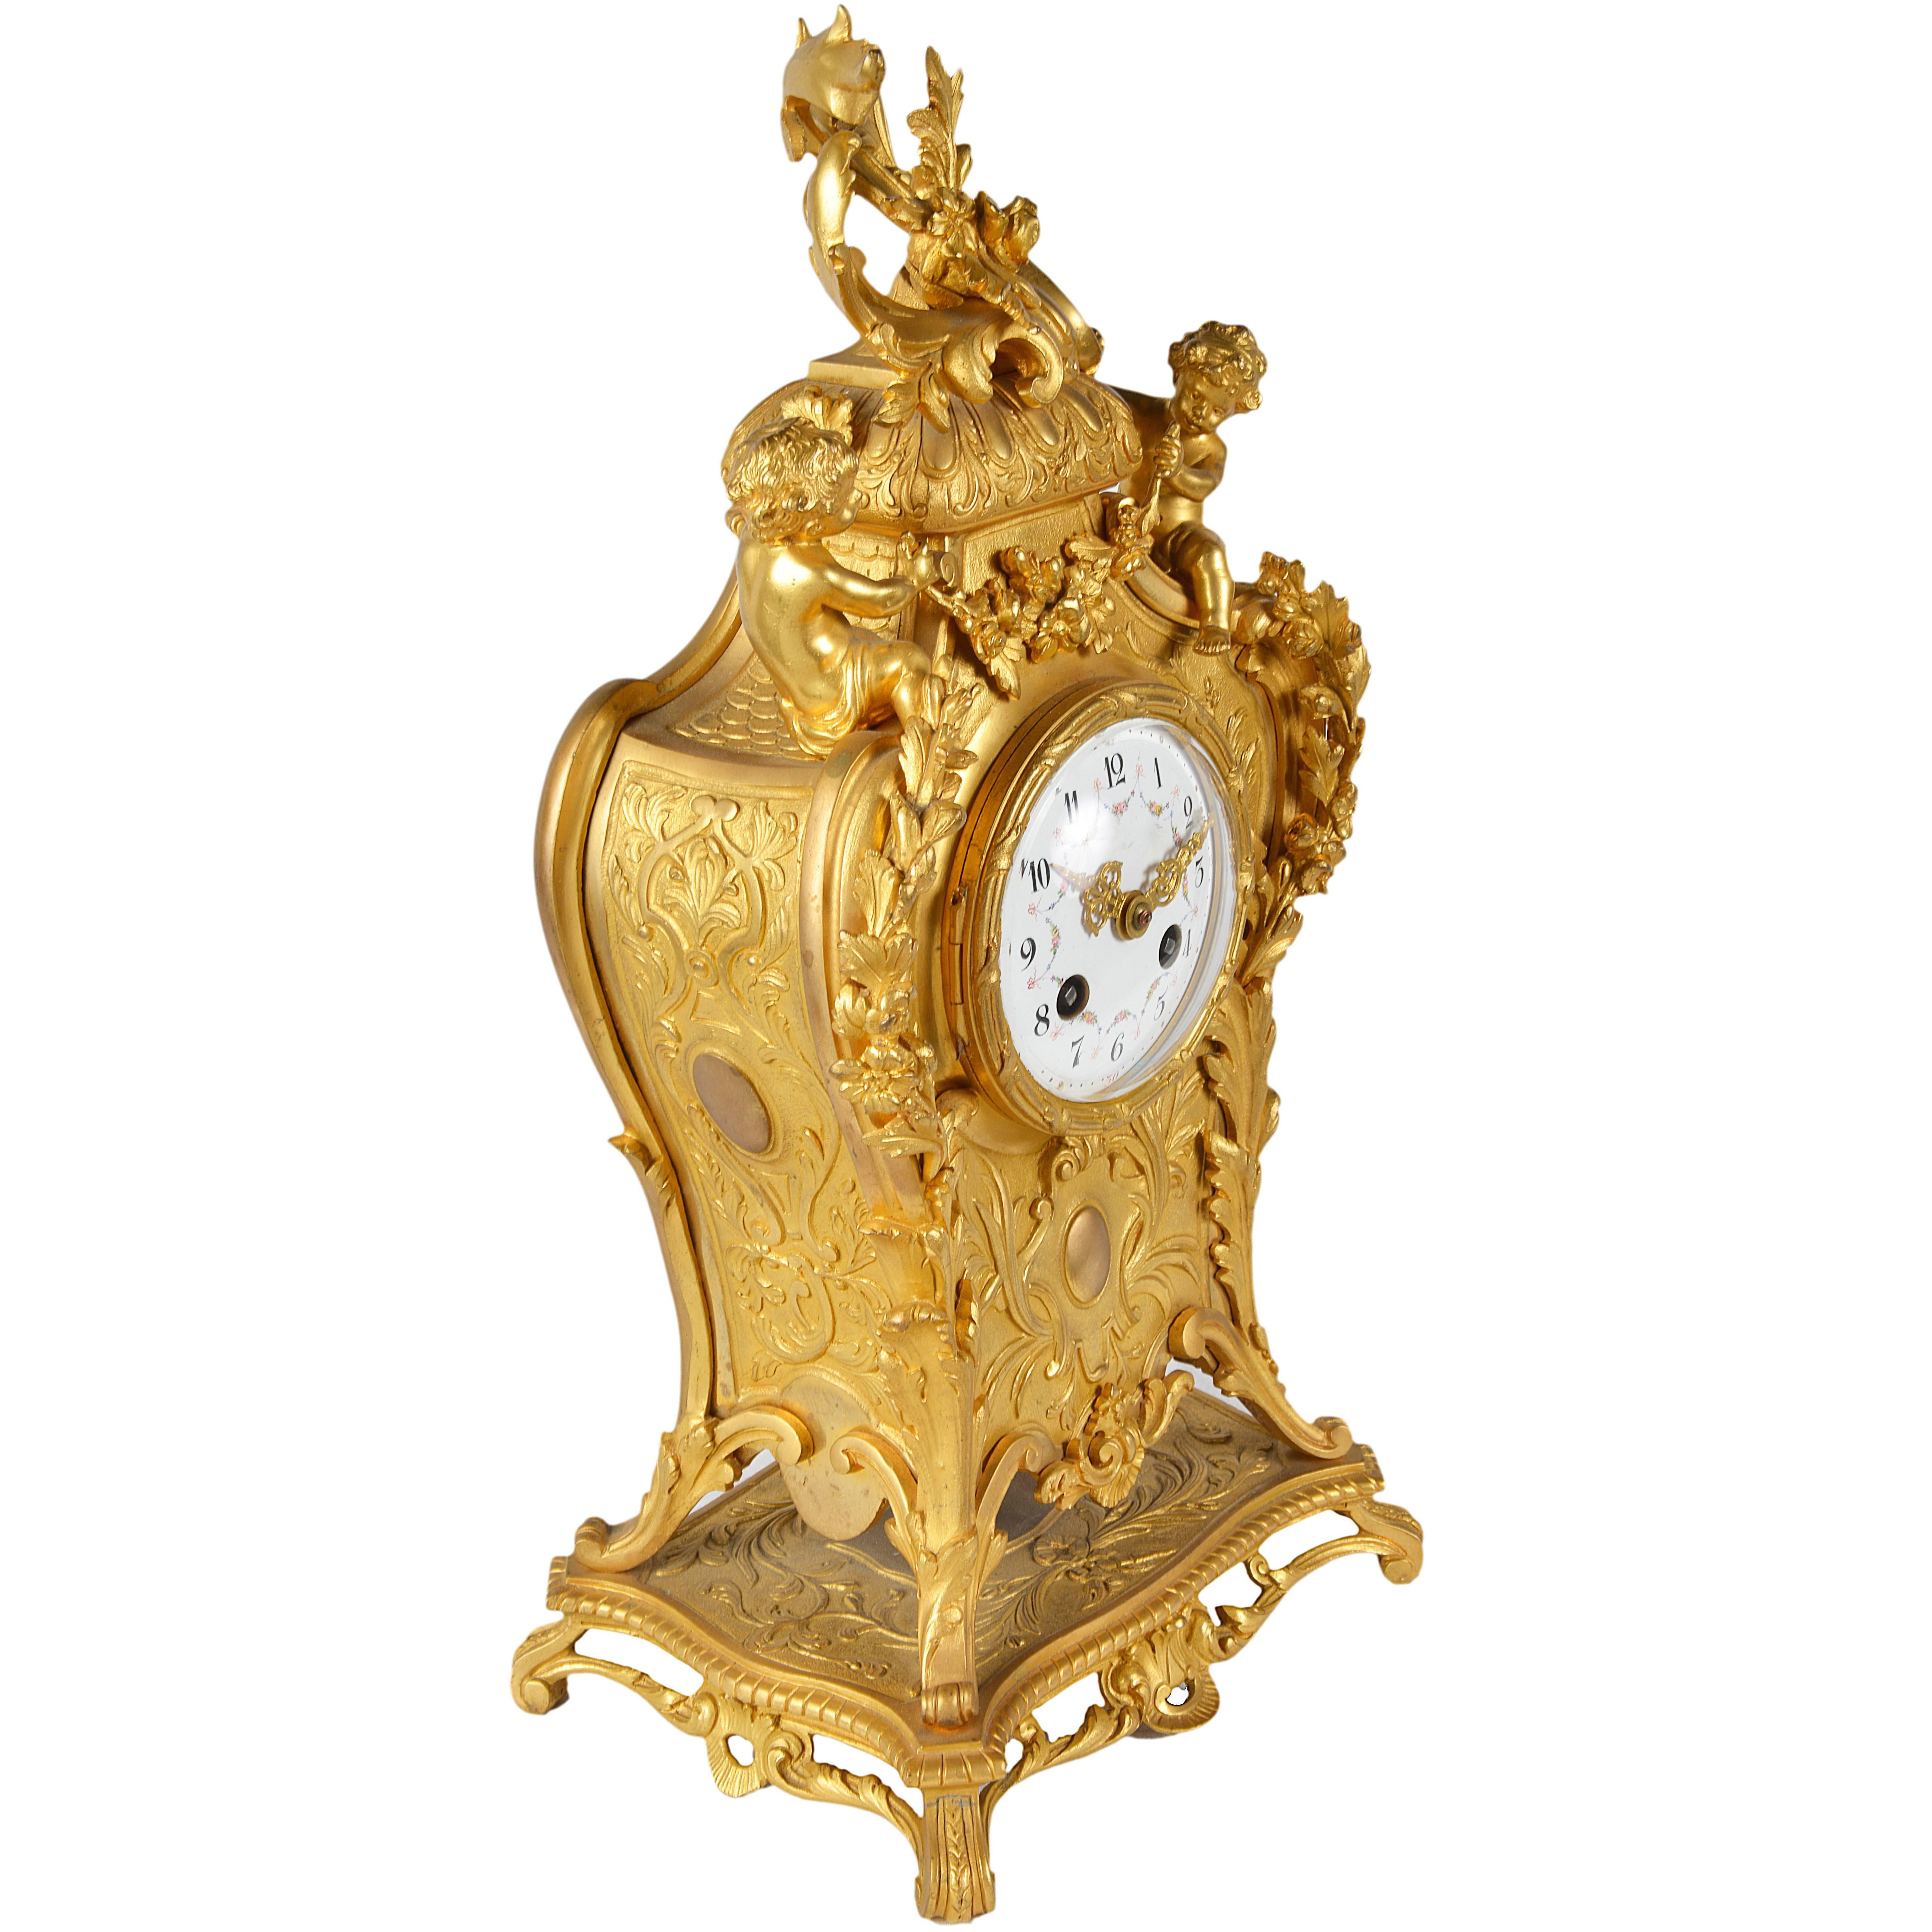 A good quality 19th century Louis XVI style gilded ormolu mantel clock, having scrolling C scroll and foliate decoration with putti on either side of the enamel dialled clock face, chiming on the hour and half hour and eight day duration.